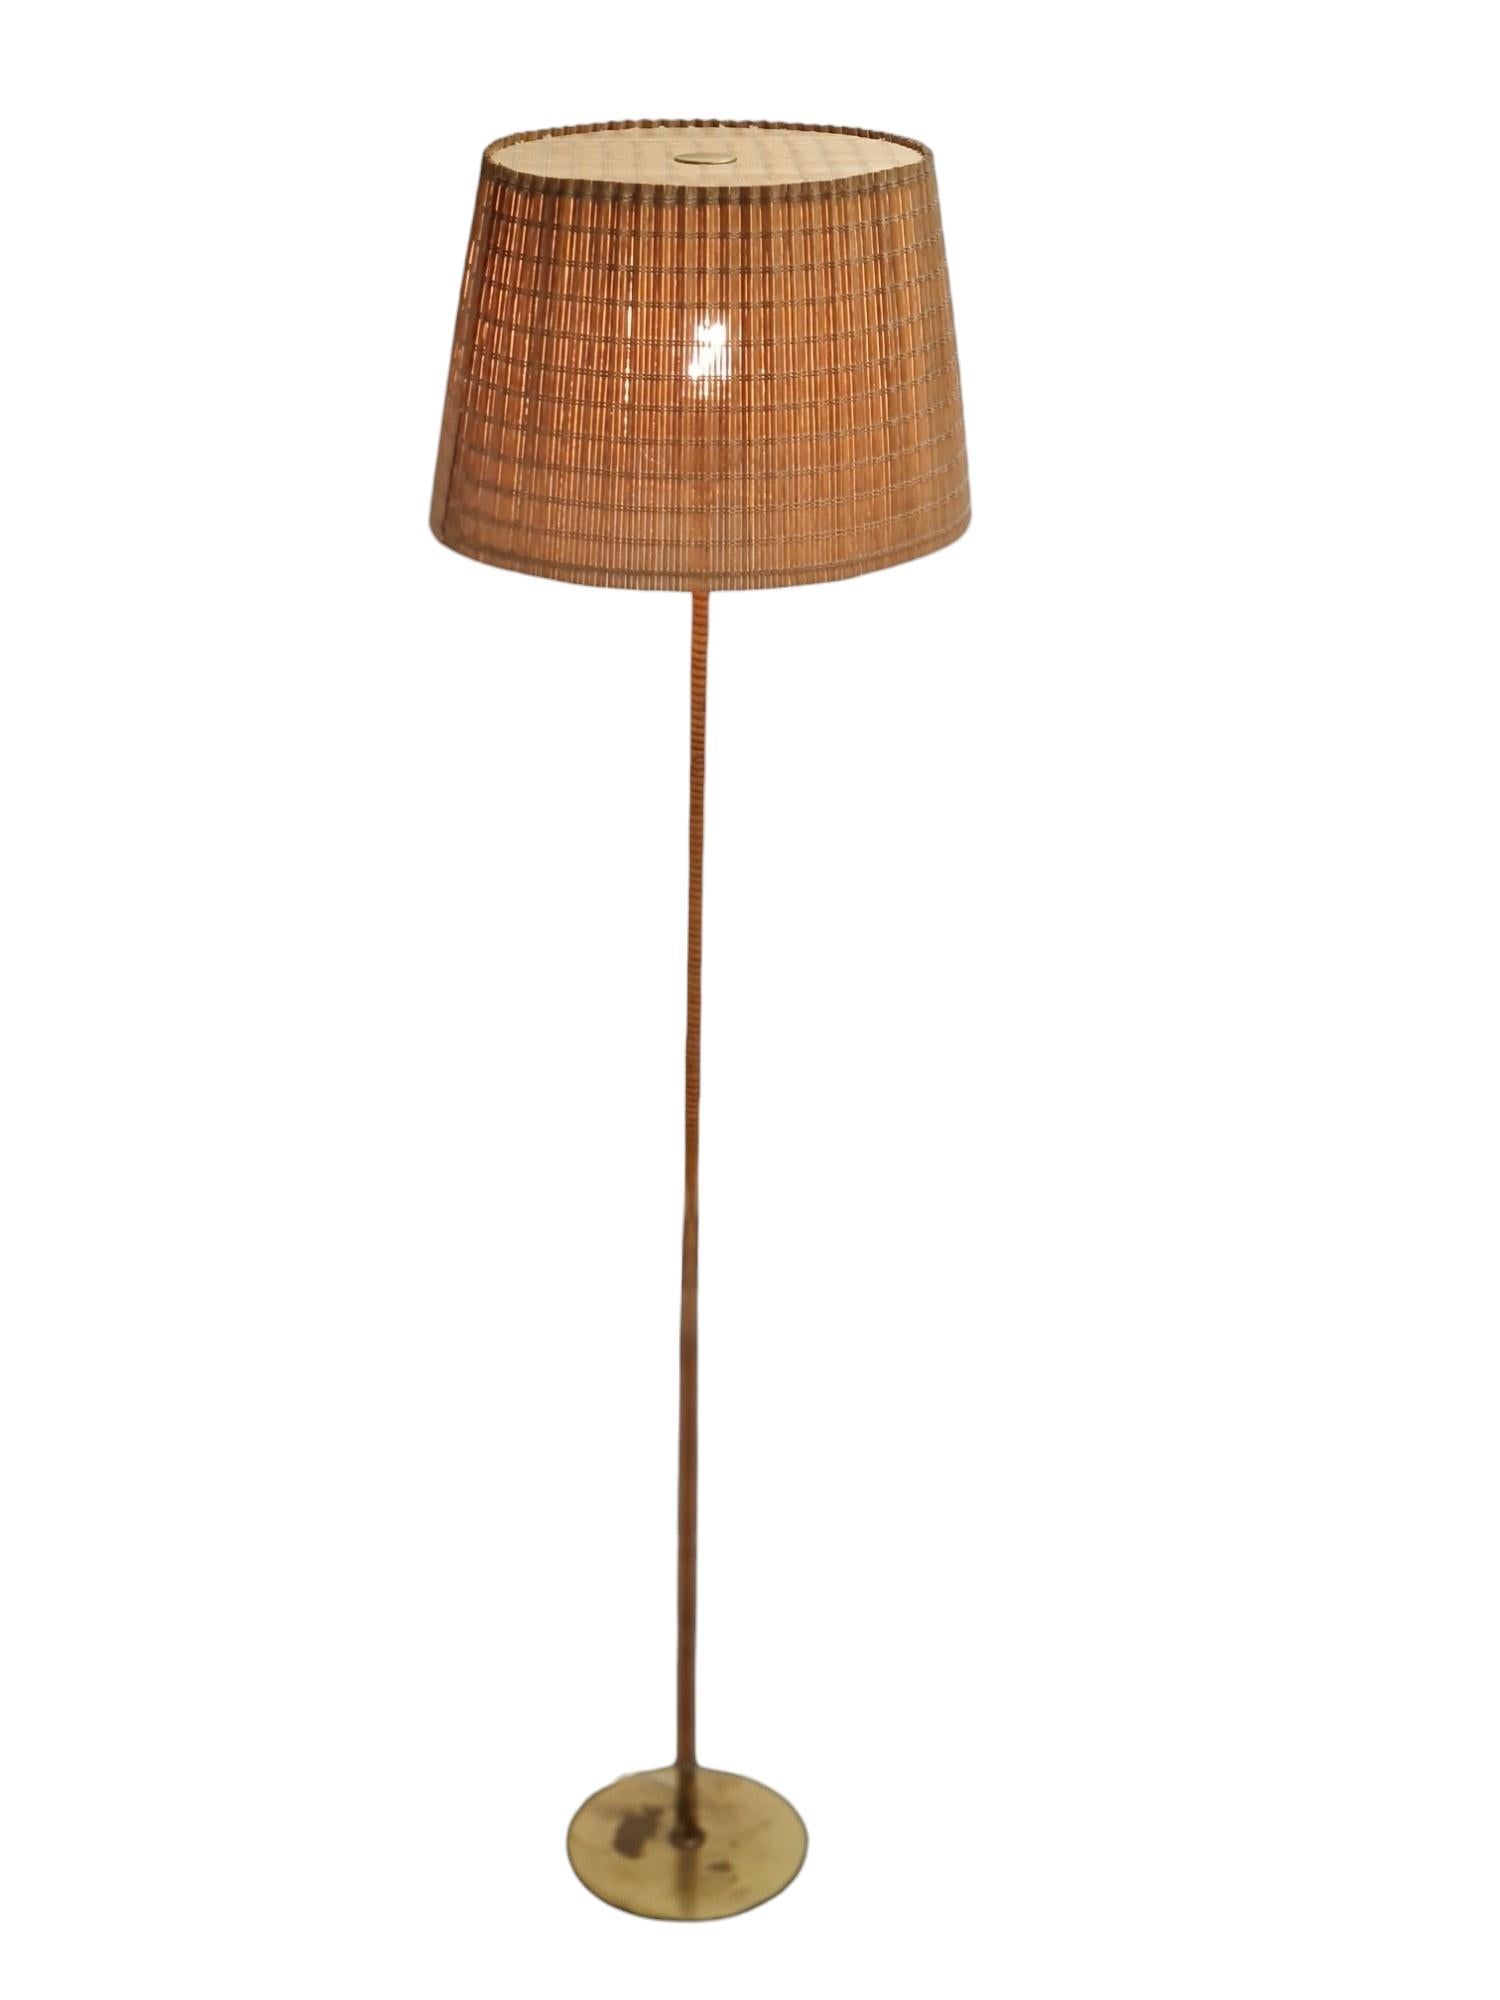 Paavo Tynell Floor Lamp Model 9627, Taito Oy  For Sale 1